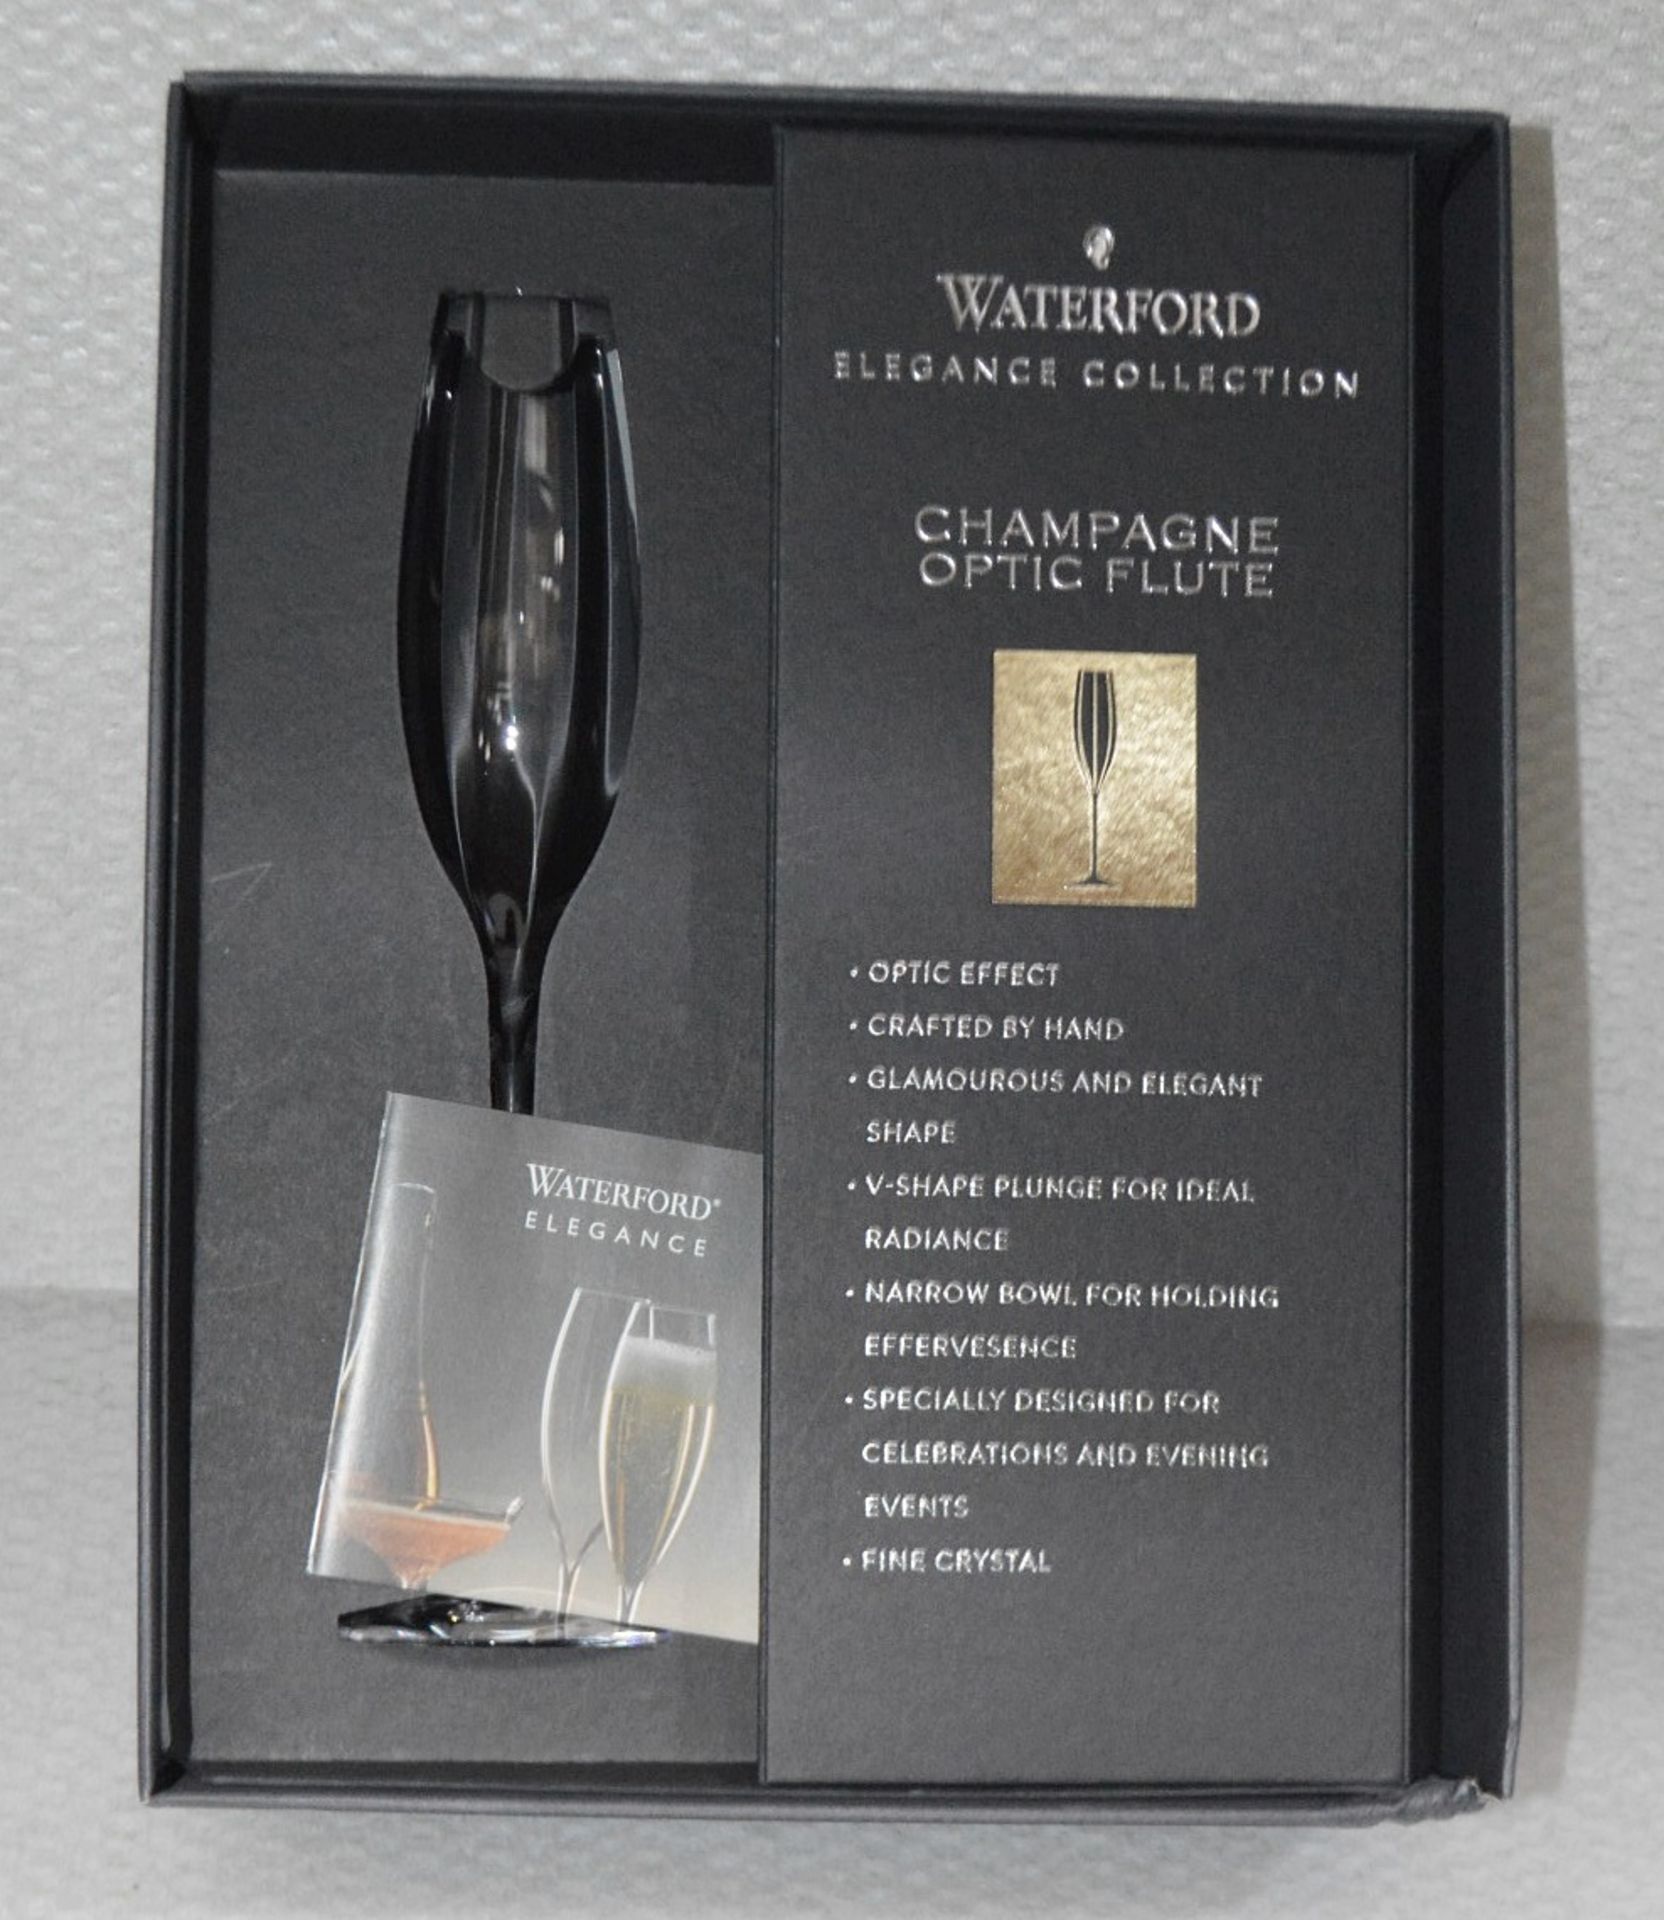 Set of 2 x WATERFORD CRYSTAL 'Elegance Optic' Champagne Flutes (300ml) - Height: 28cm - Unused Boxed - Image 5 of 8